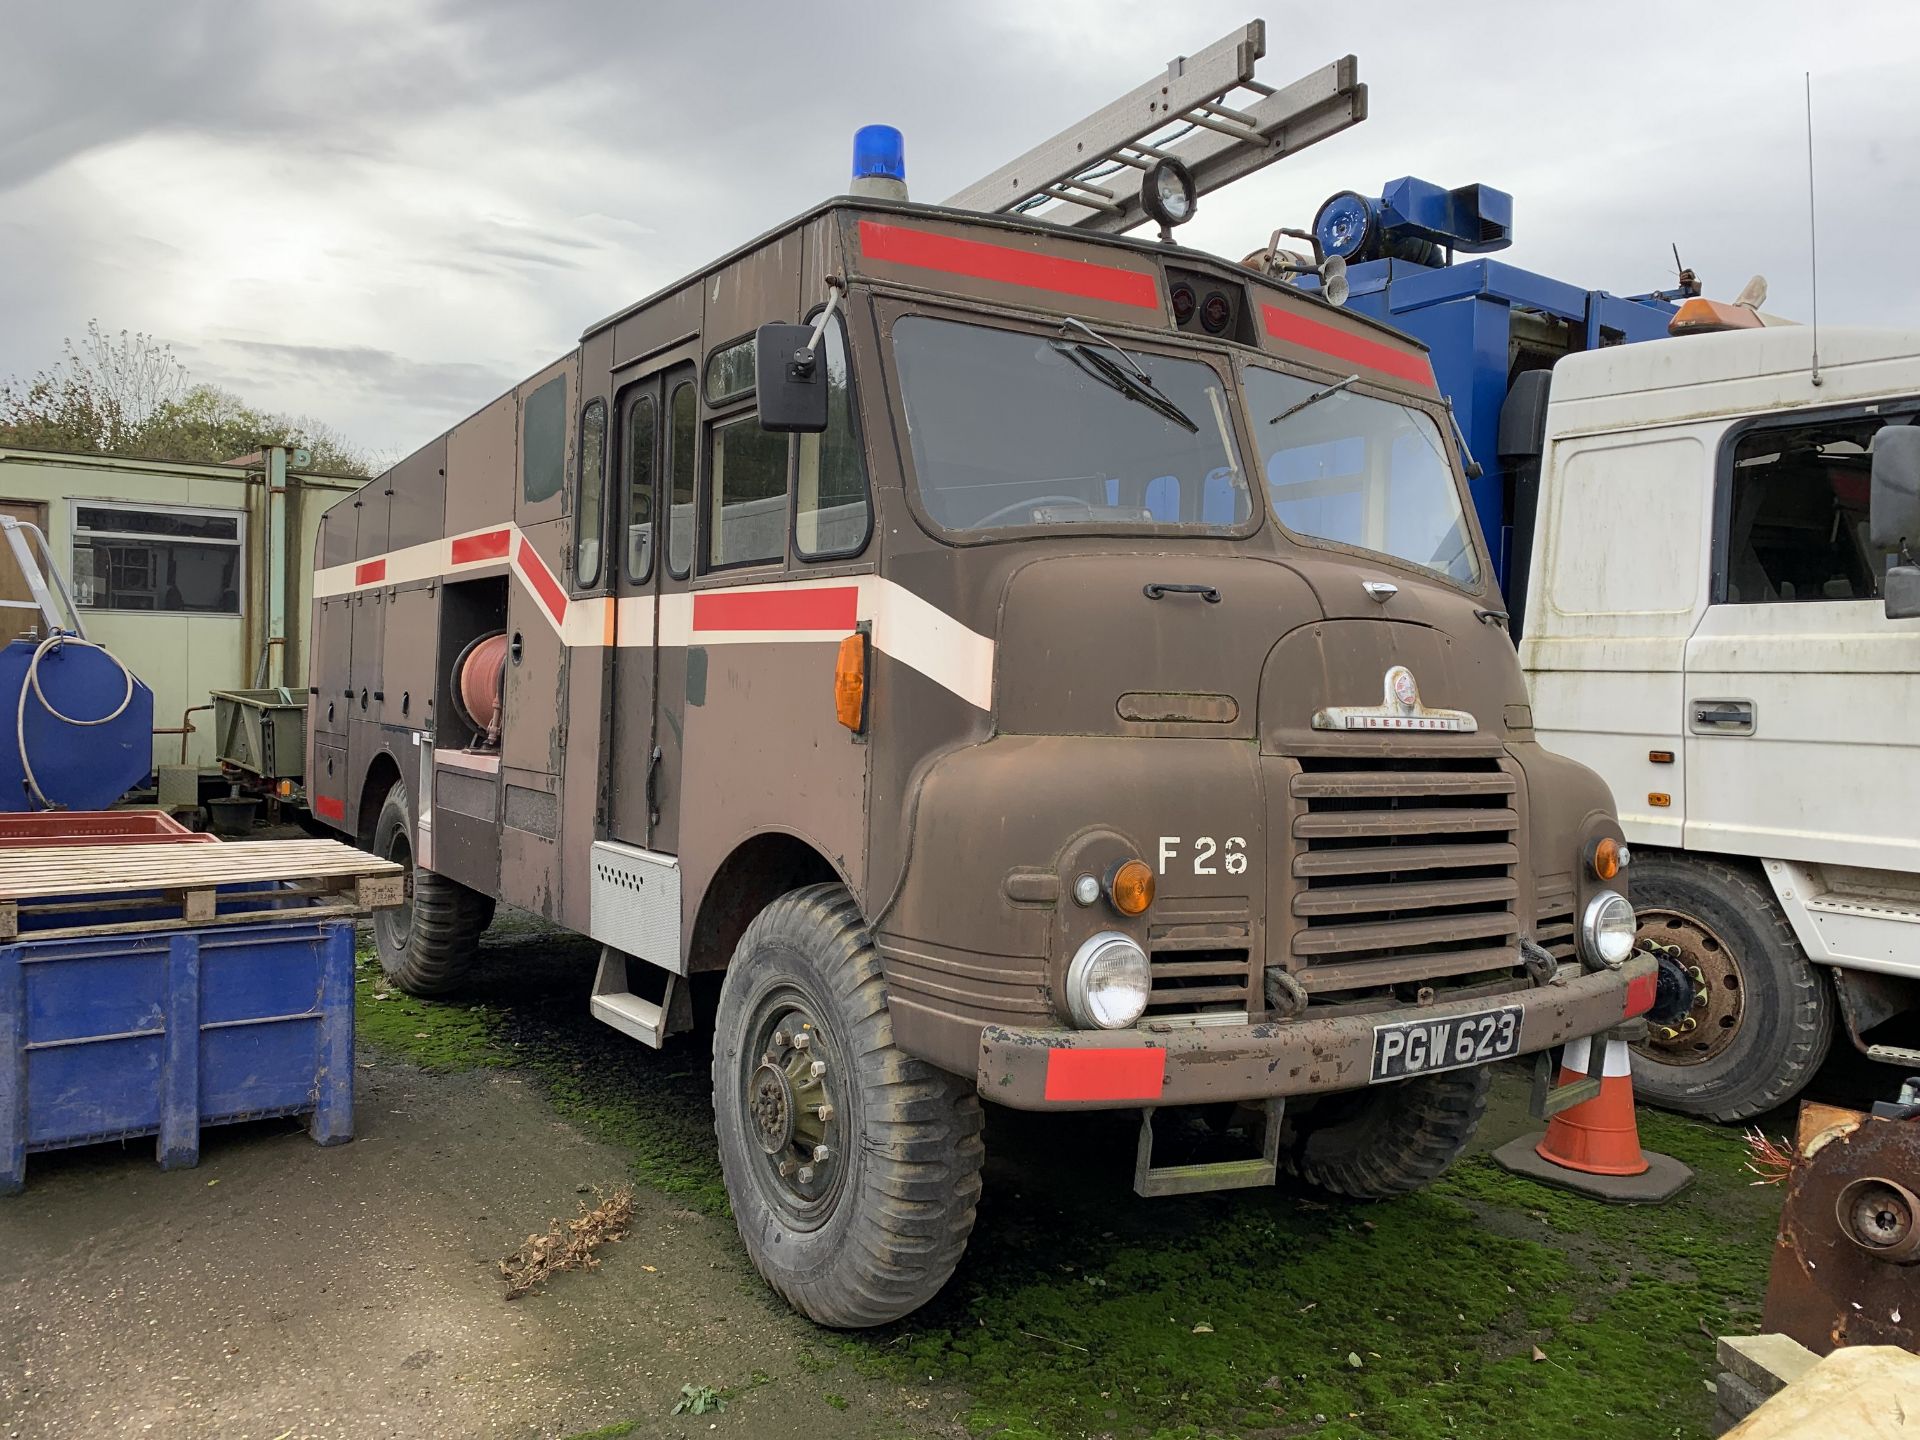 Bedford Green Goddess fire engine, PGW 623, with V5, complete, ex MOD, petrol engine, with spare